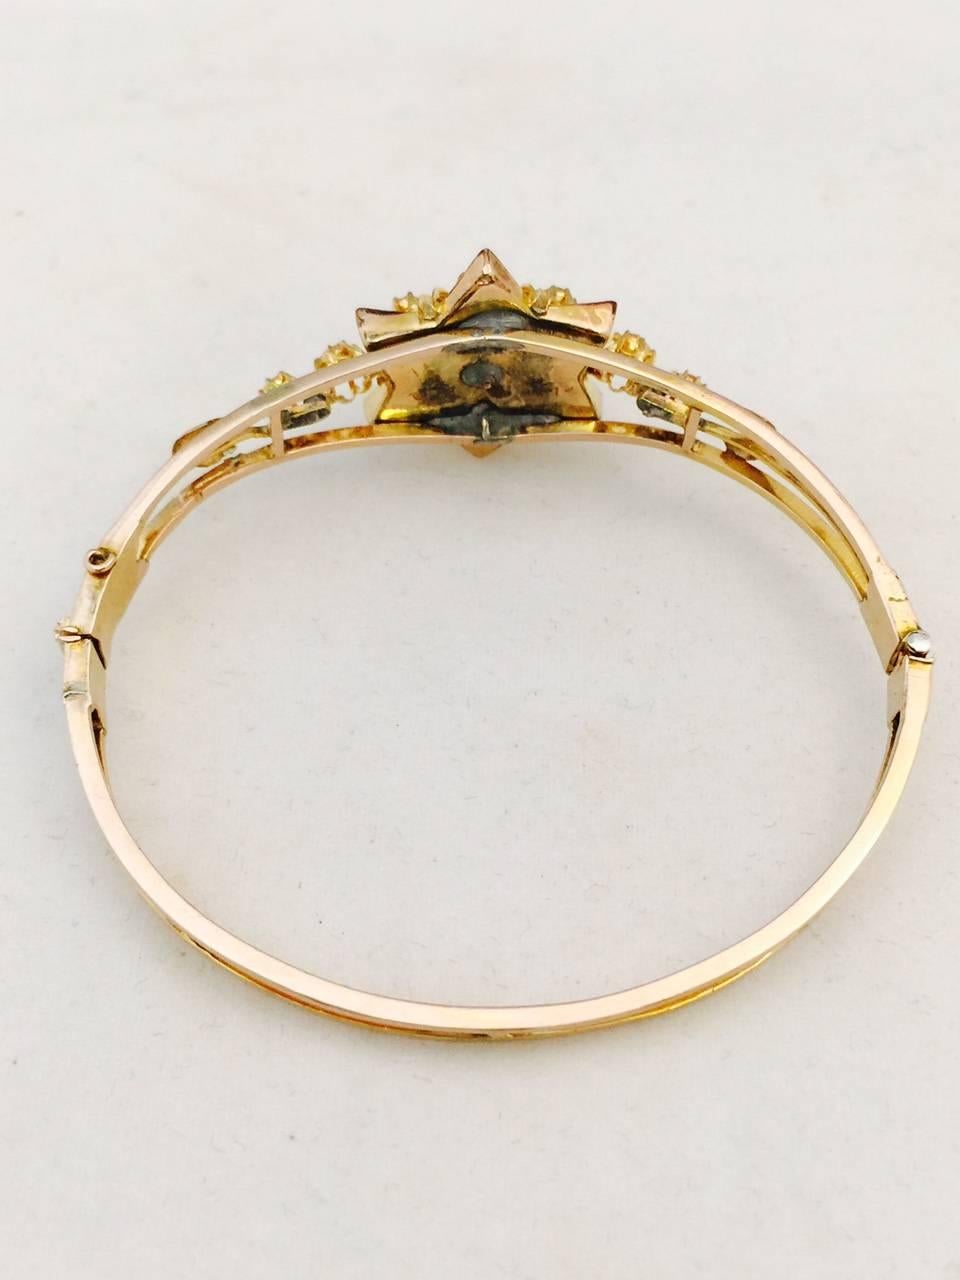 Fabricated circa 1870's, this 14 karat yellow gold antique bangle bracelet features a star design top containing Rose cut natural blue tinted diamonds weighing approximately 1.25 carats total. Delicate yet sturdy construction.  Bracelet opens wide